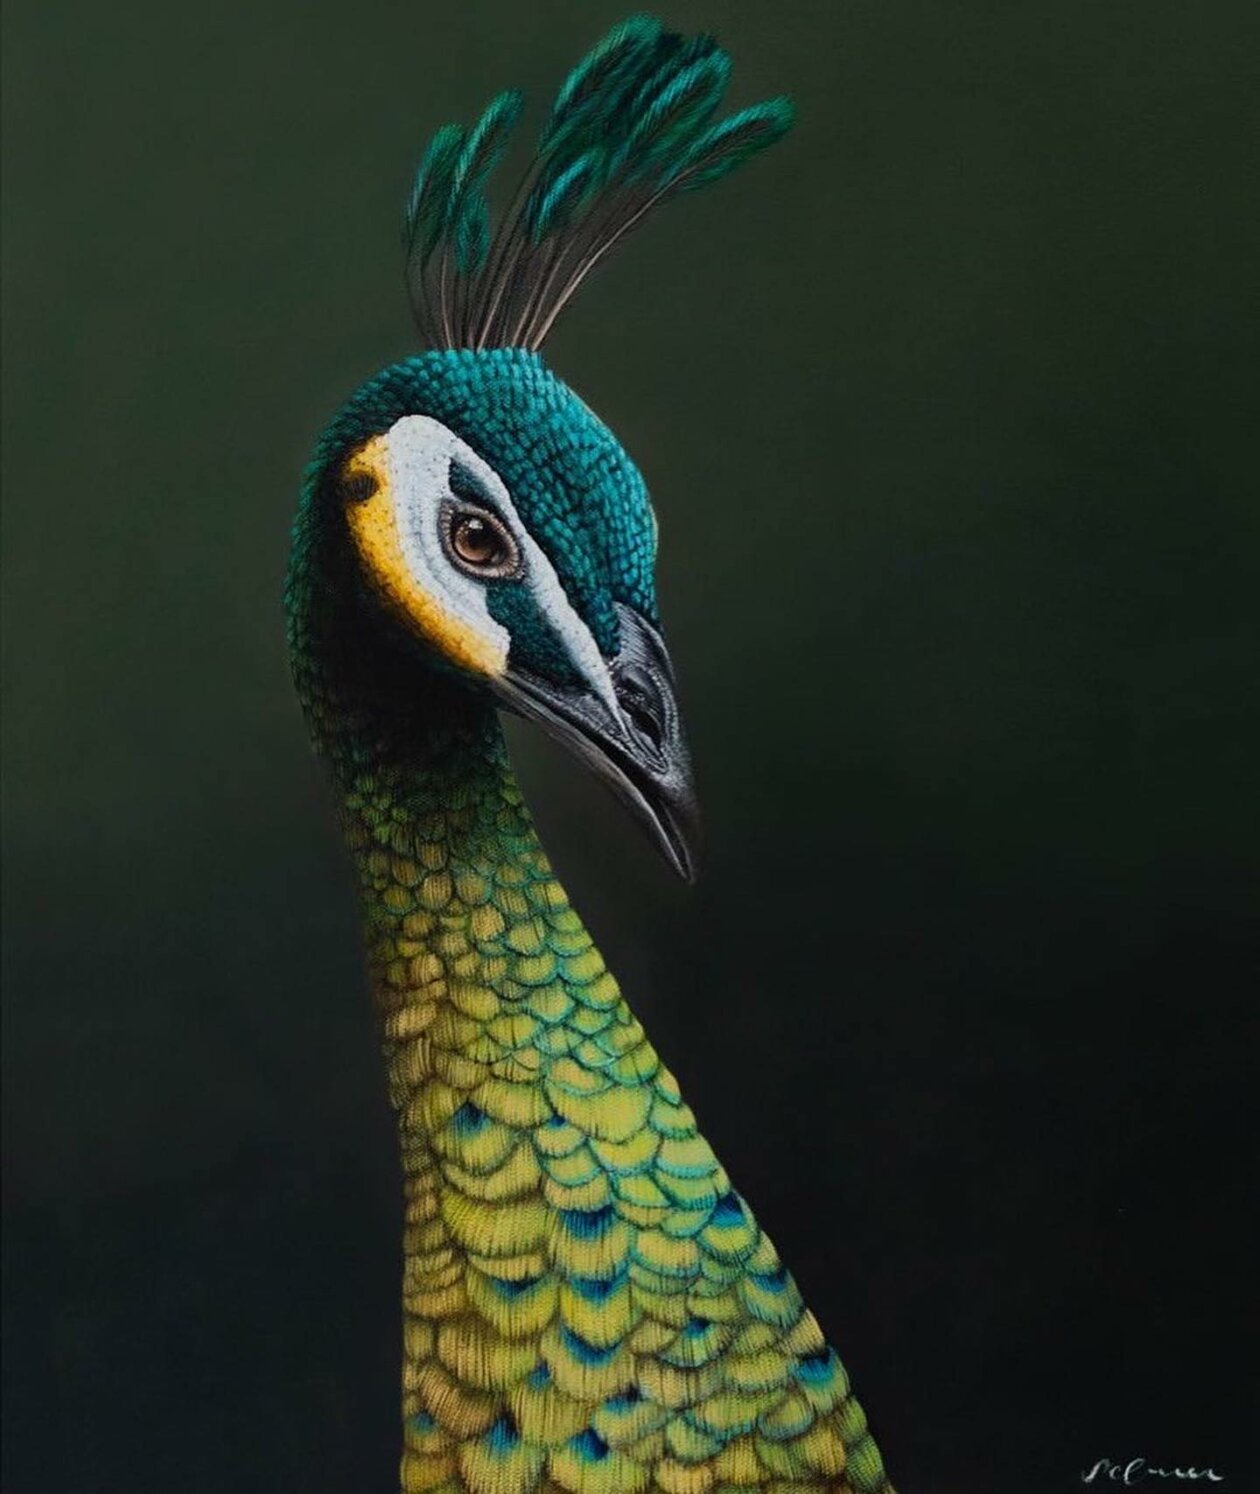 Hyper Realistic Animal Portrait Paintings By Sophie Green (7)